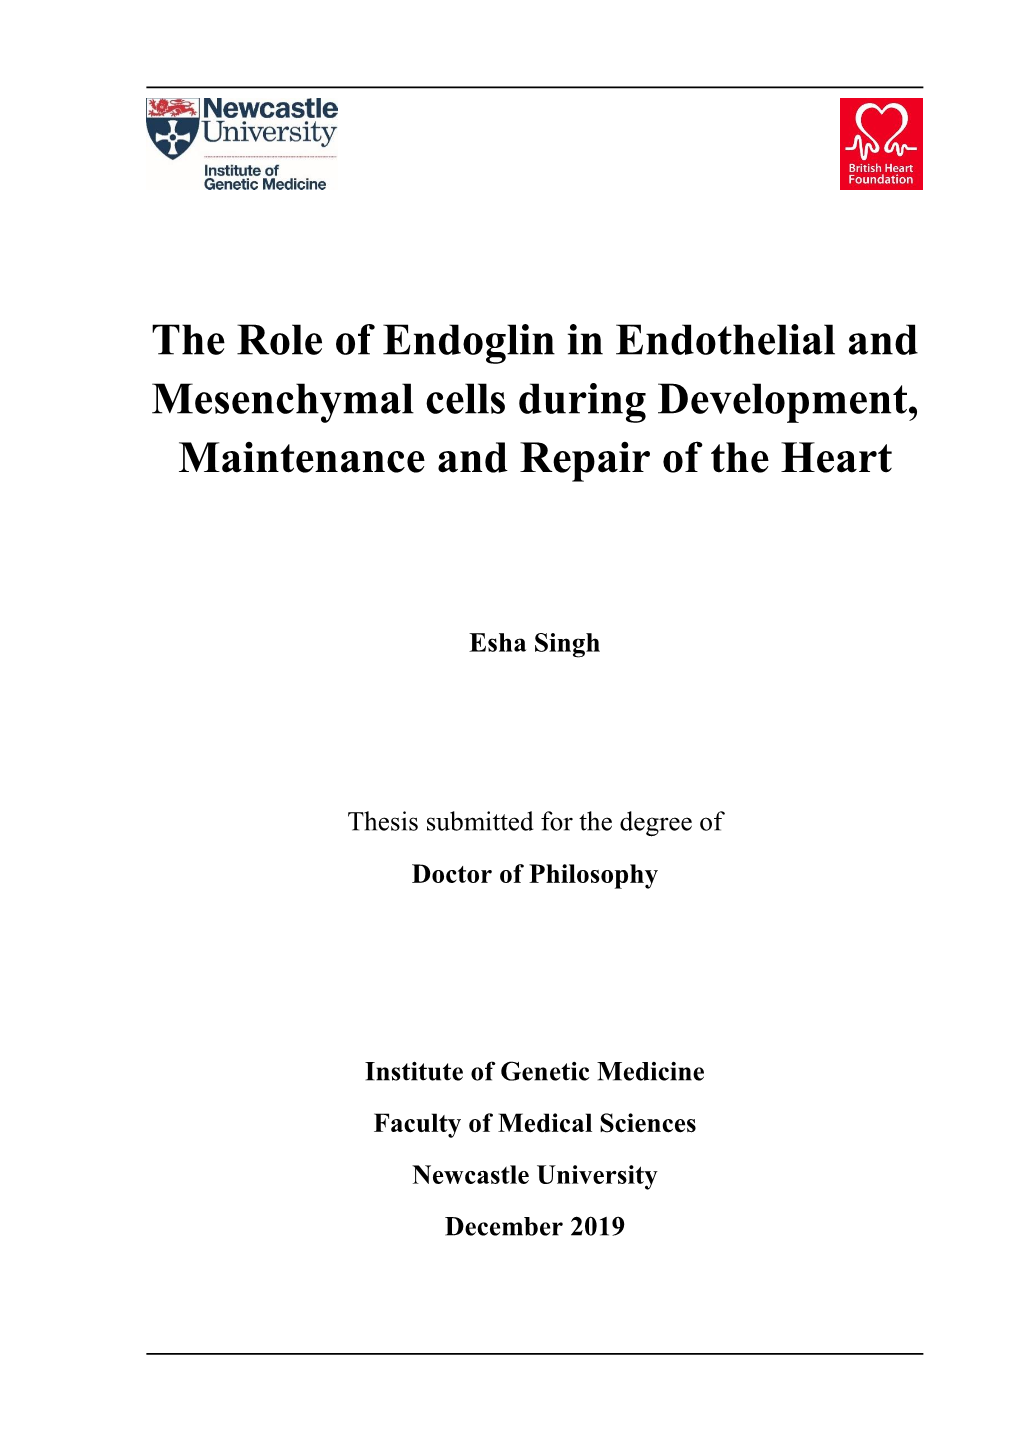 The Role of Endoglin in Endothelial and Mesenchymal Cells During Development, Maintenance and Repair of the Heart